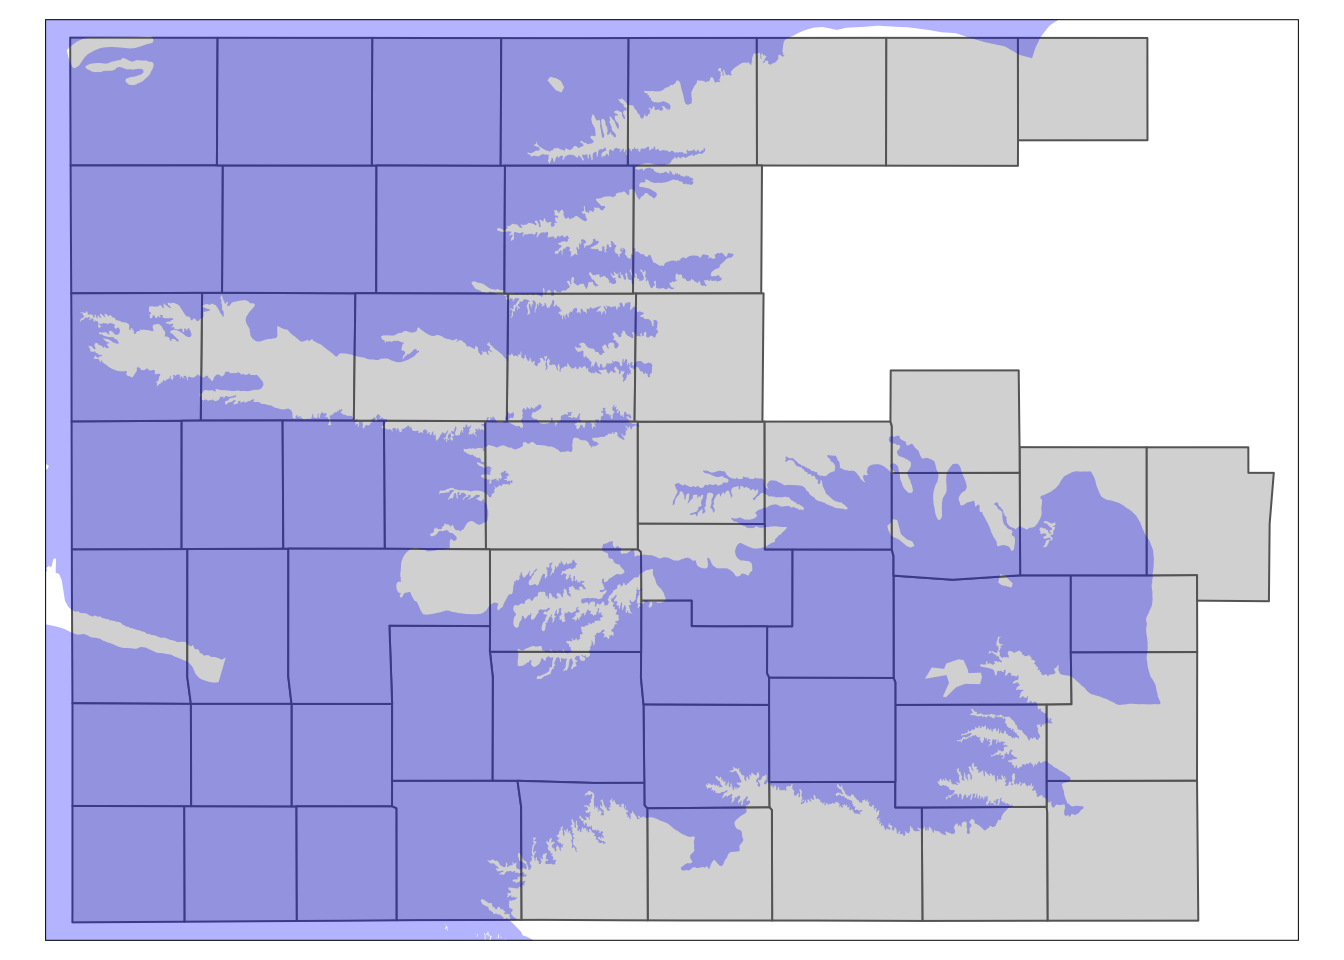 The results of spatially subsetting Kansas counties based on HPA boundary